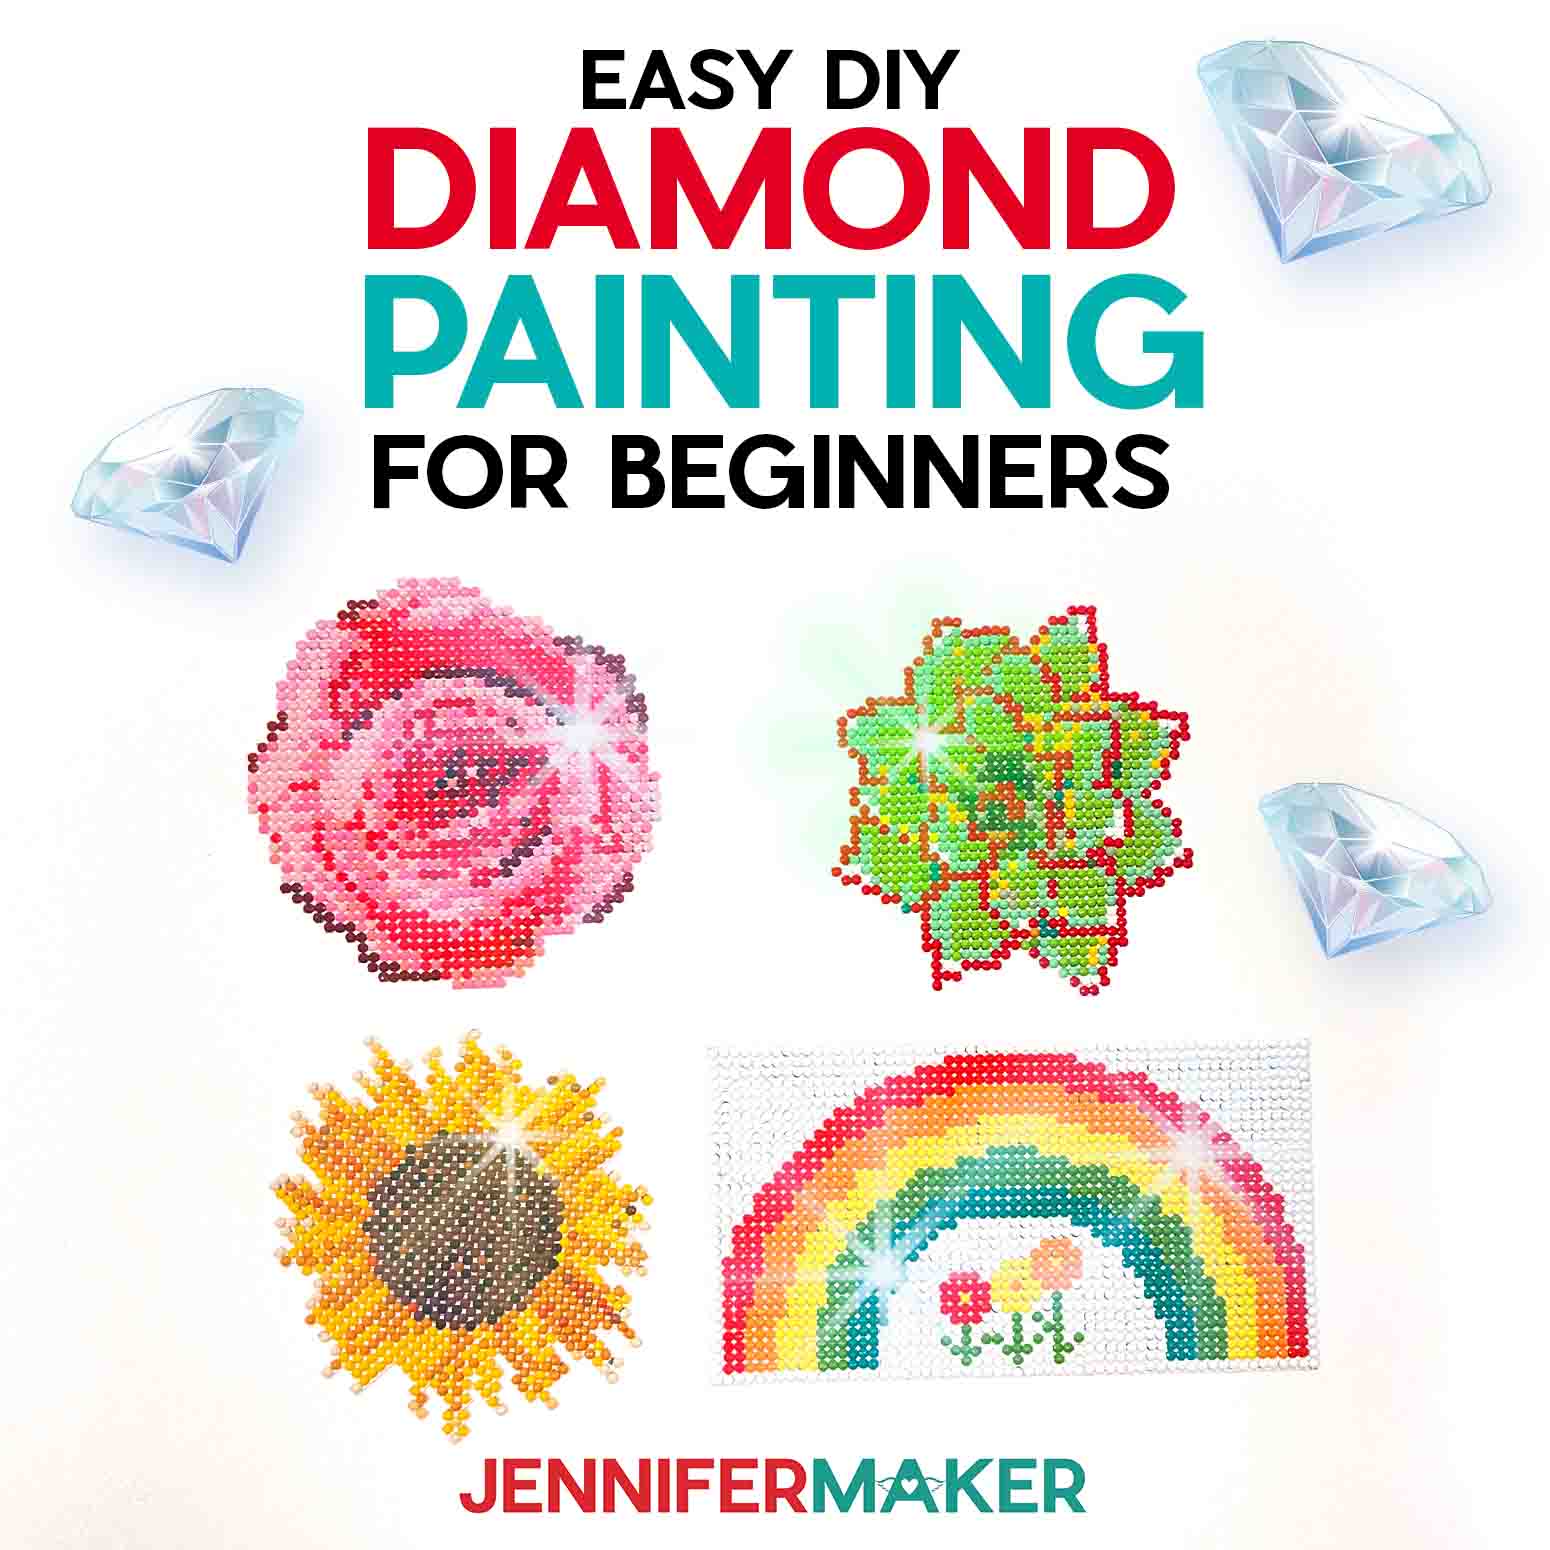 Rose, Succulent, Sunflower, and Rainbow diamond painting for beginners projects using a Cricut.